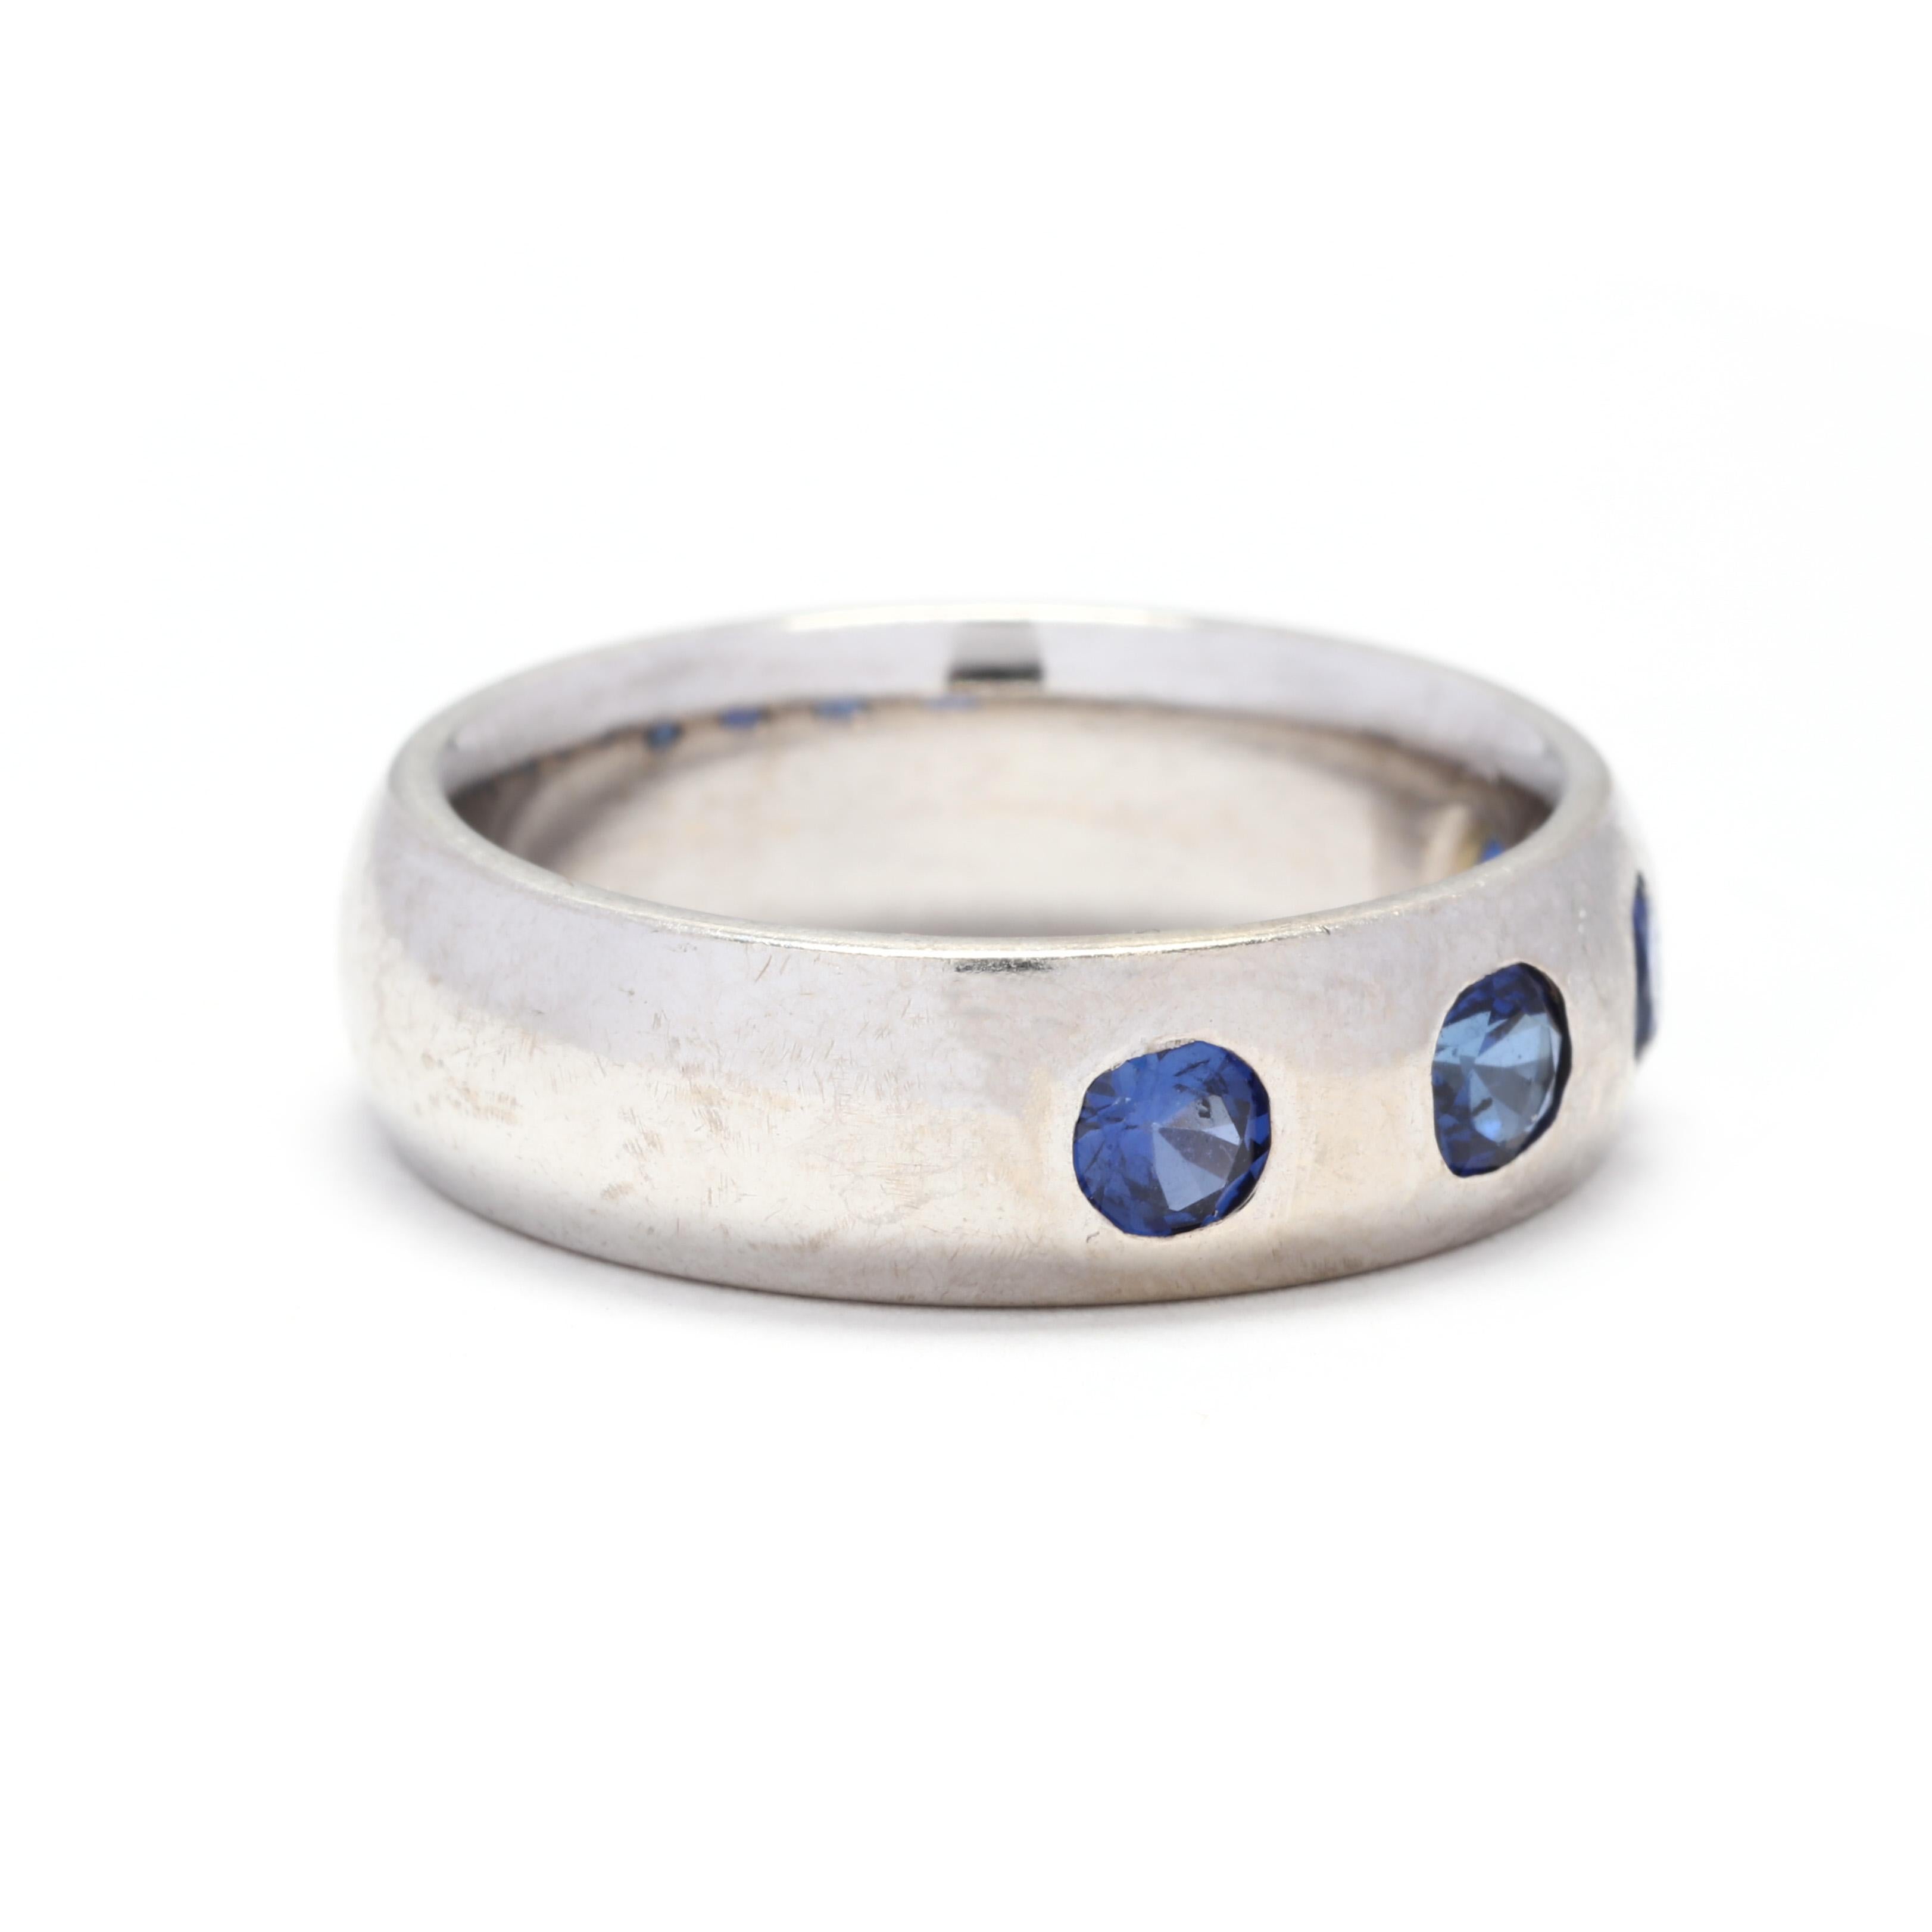 A vintage 14 karat white gold sapphire flush set ring. This ring features a 6mm slightly domed band with four gypsy set cushion cut cornflower blue sapphires weighing approximately 1.76 total carats.

Stones:

- sapphires, 4 stones

- cushion cut

-